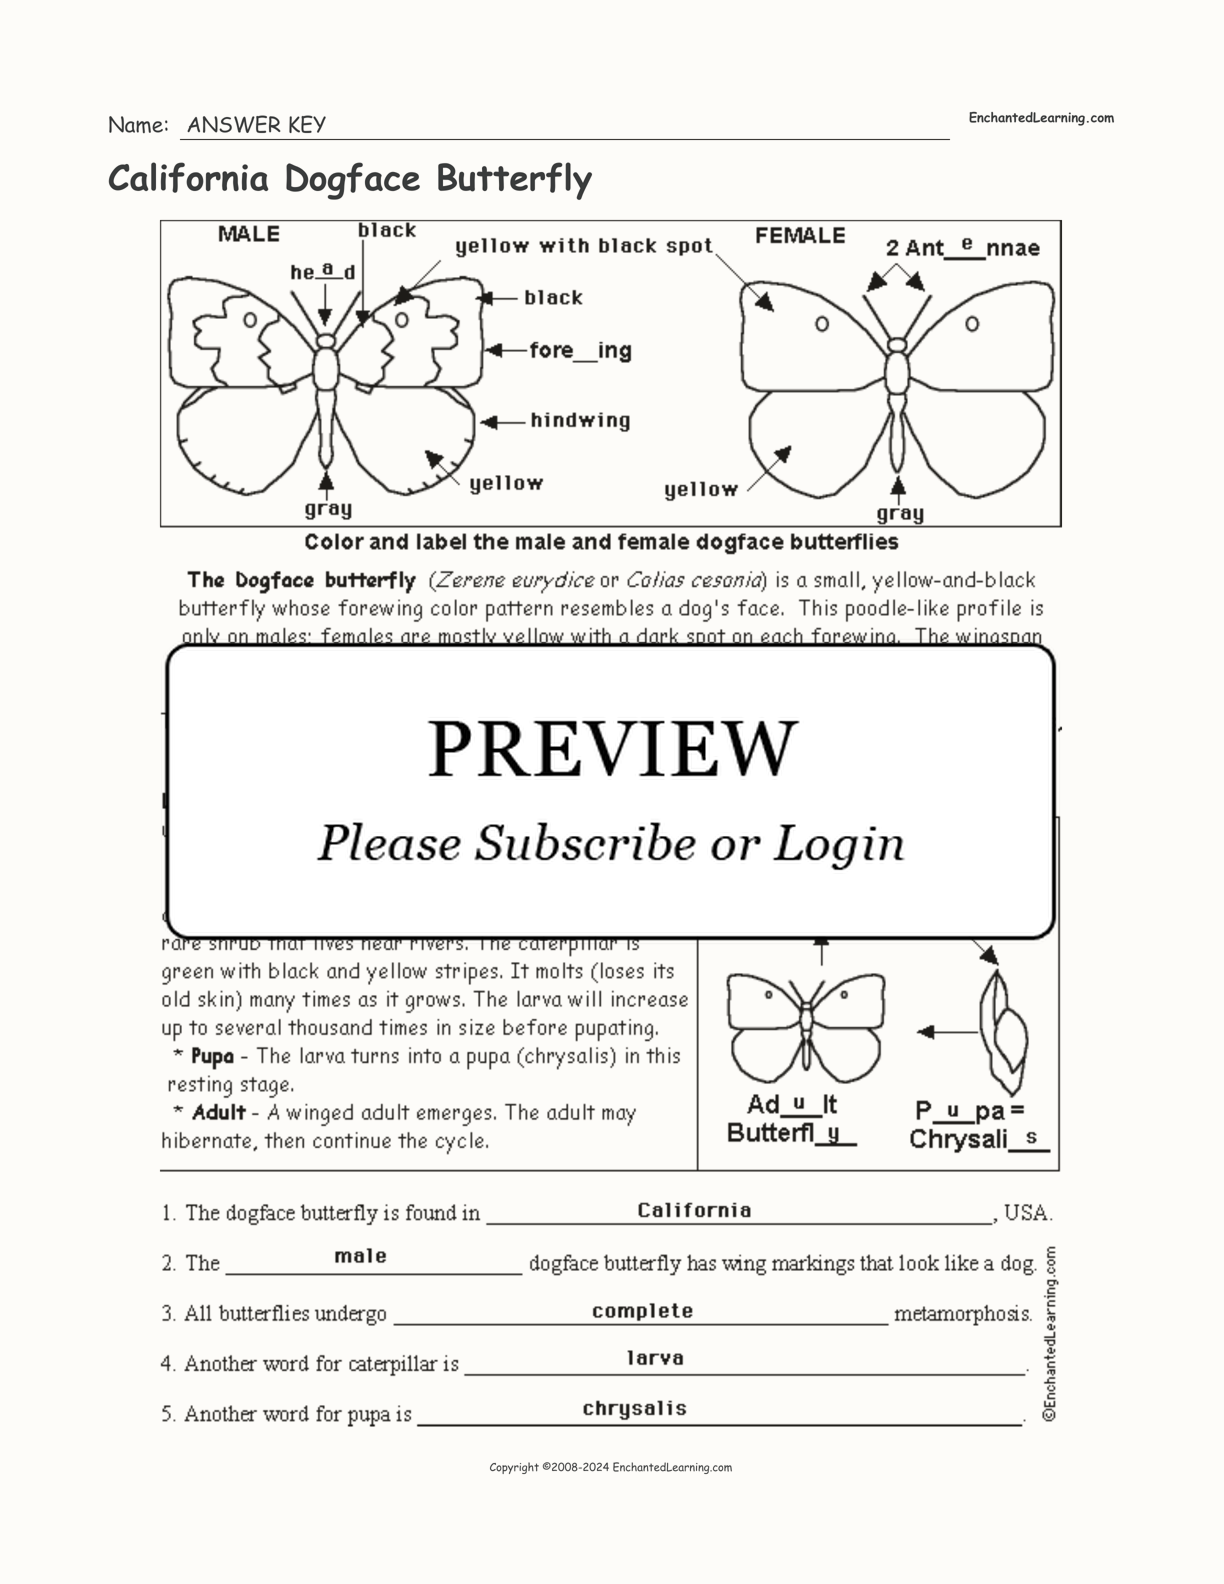 California Dogface Butterfly interactive worksheet page 2